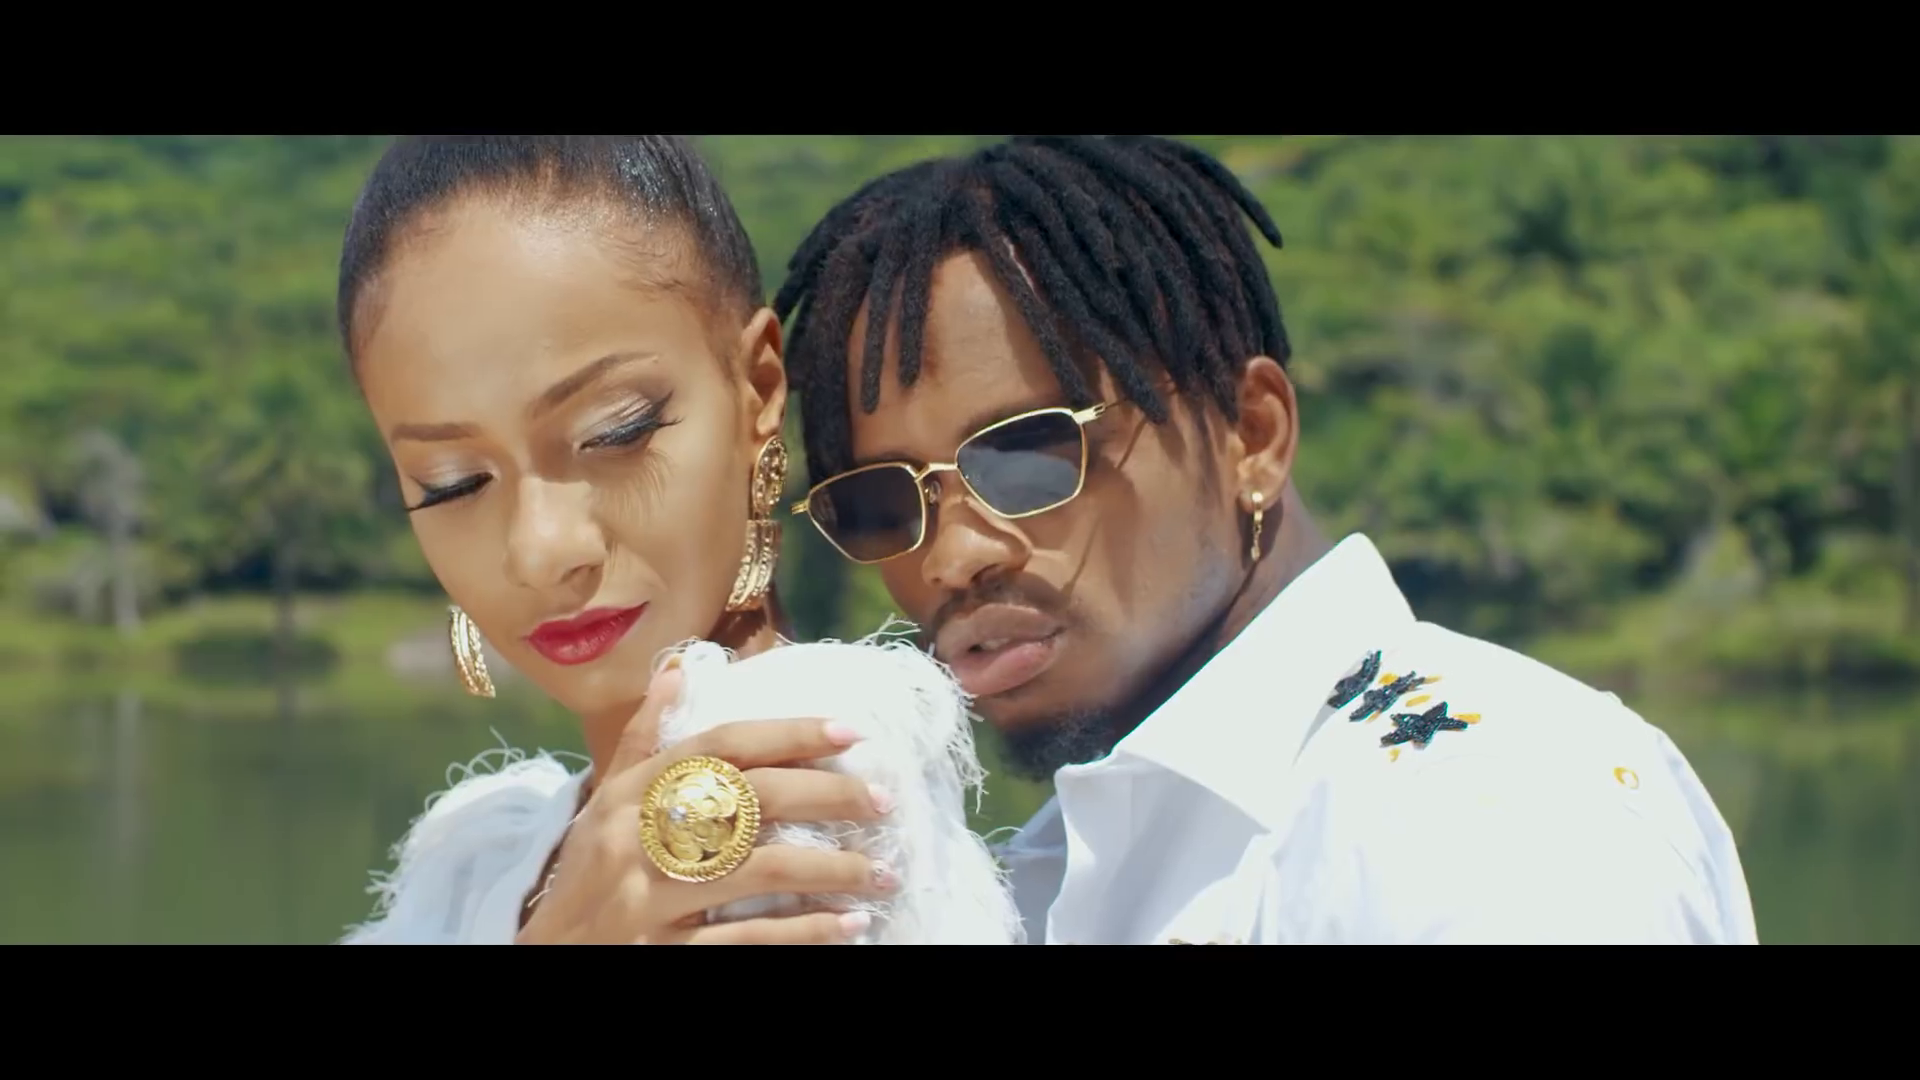 diamond platinumz with his model in 'The one" music video